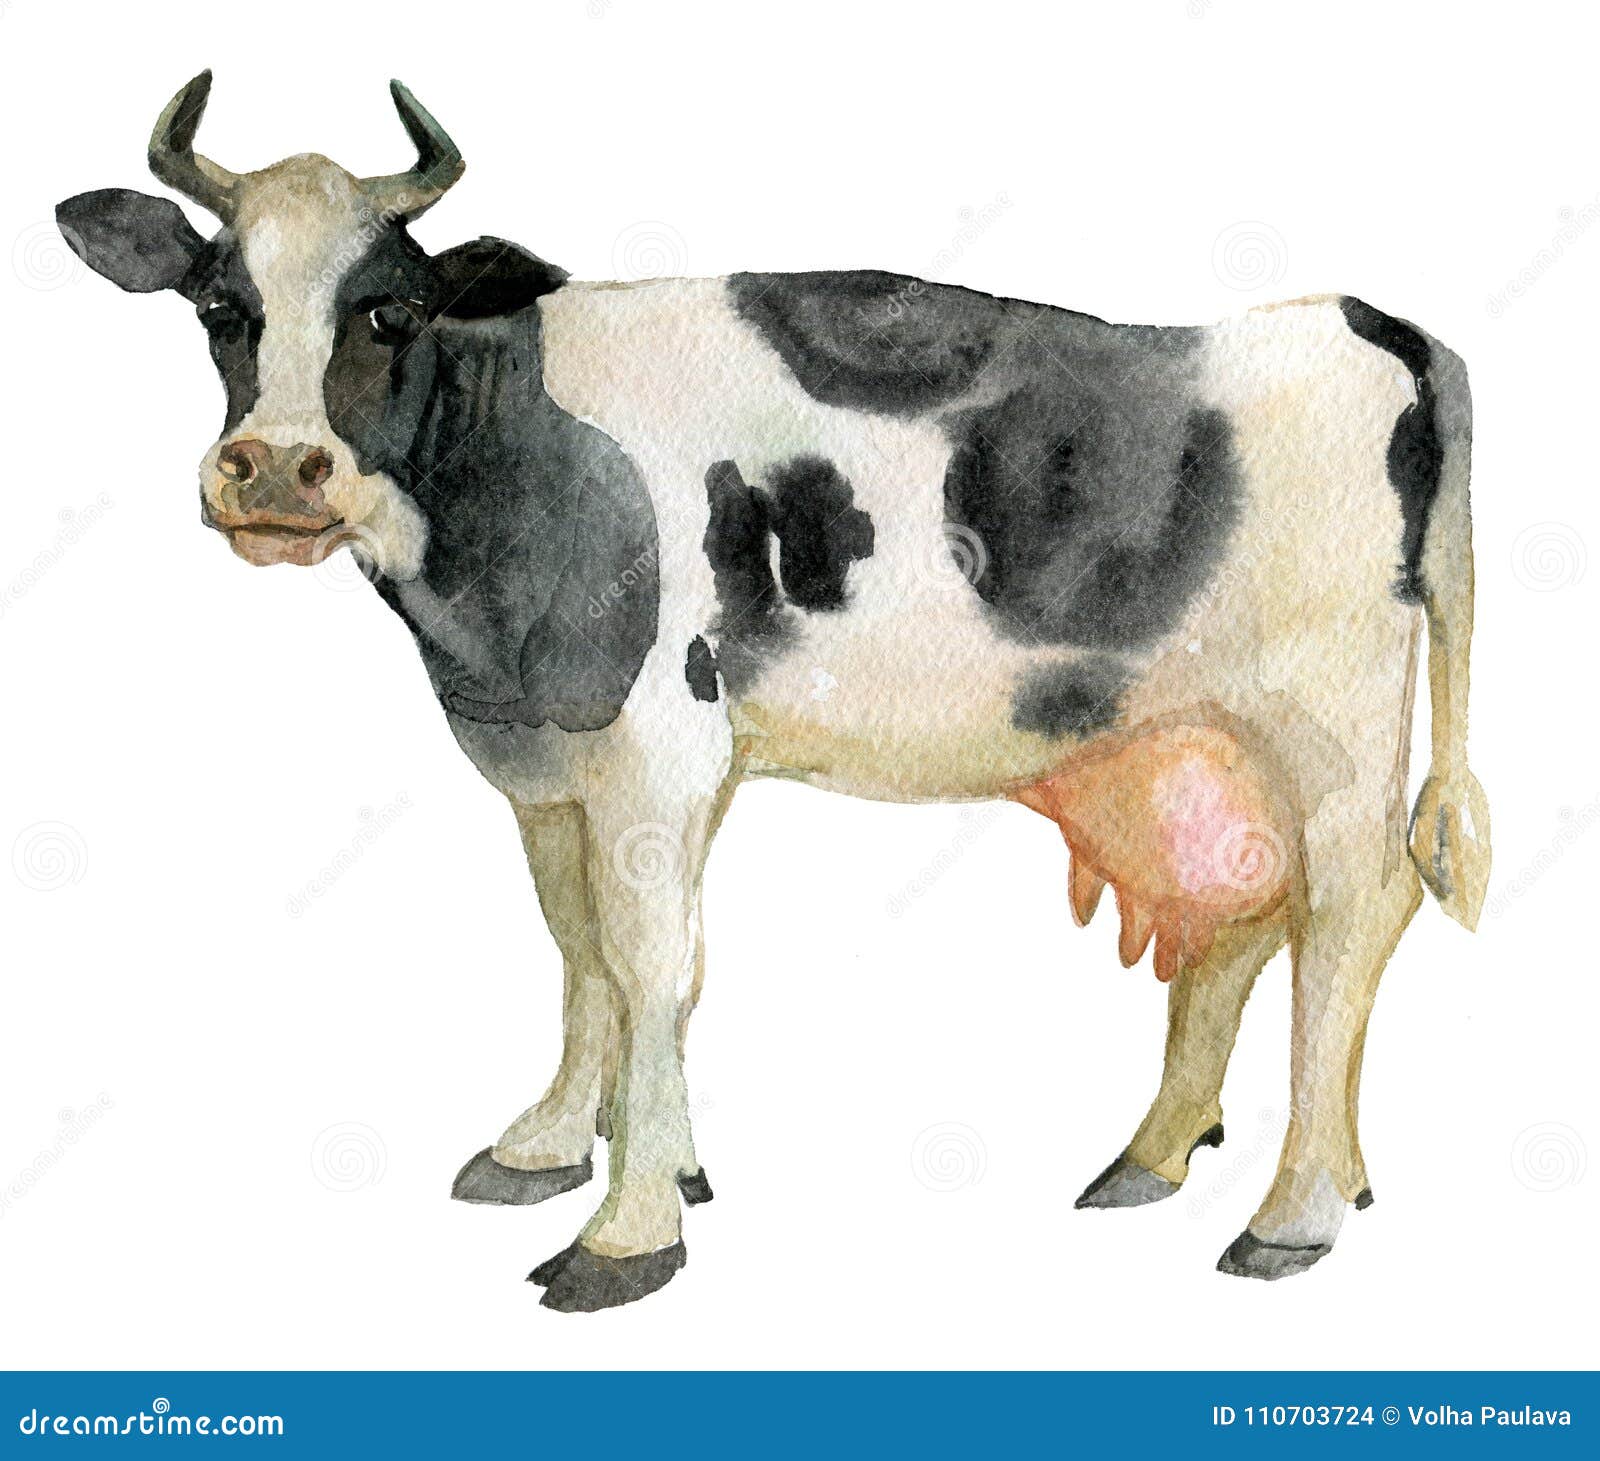 Cow, Farm Animals, Isolated on White, Watercolor Stock Illustration -  Illustration of domestic, illustrations: 110703724